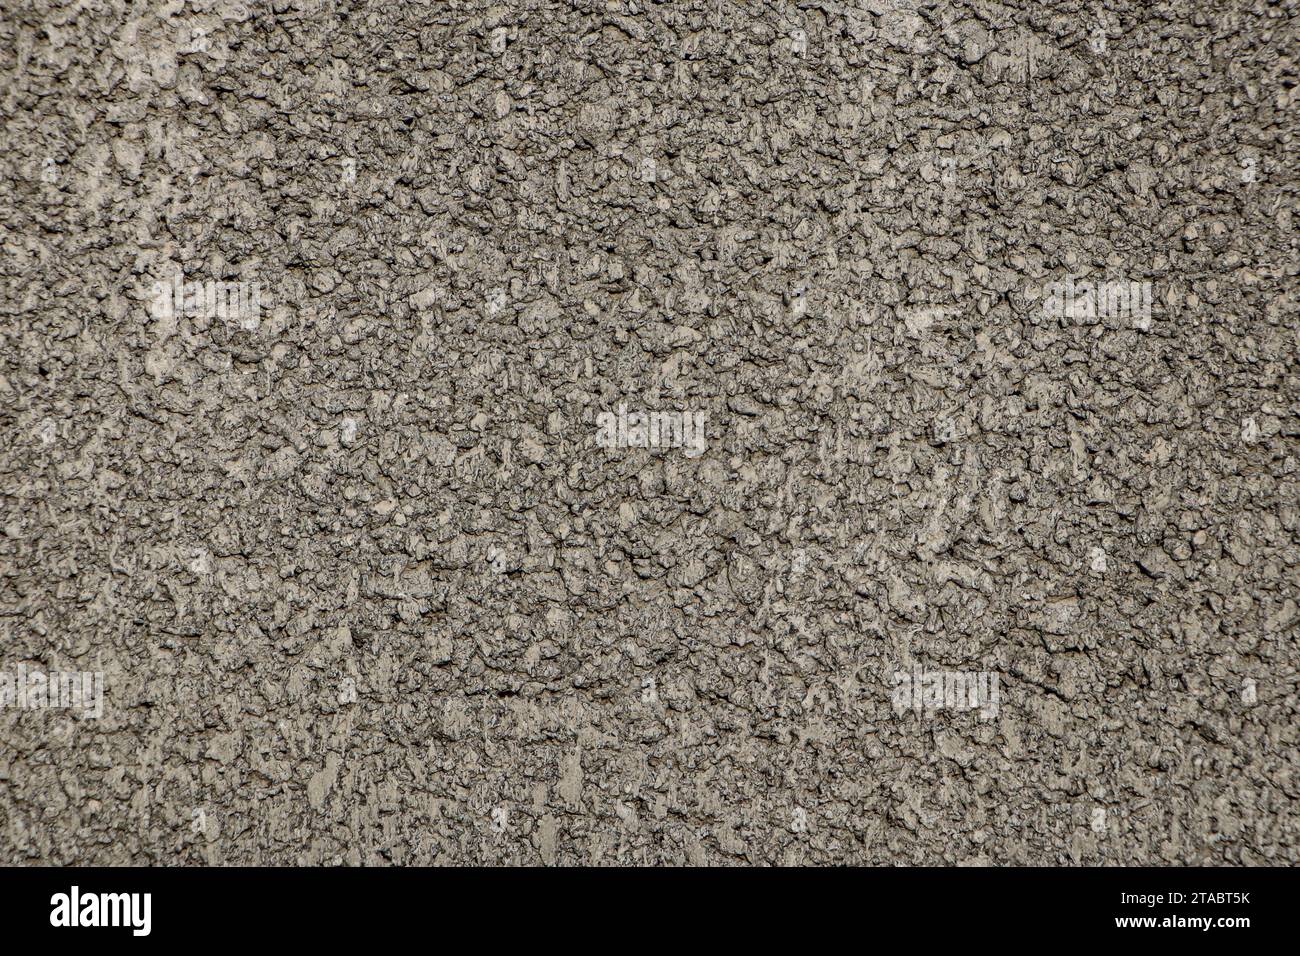 Close-up shot of a cement wall intentionally roughening the surface to create a wall fence. Stock Photo